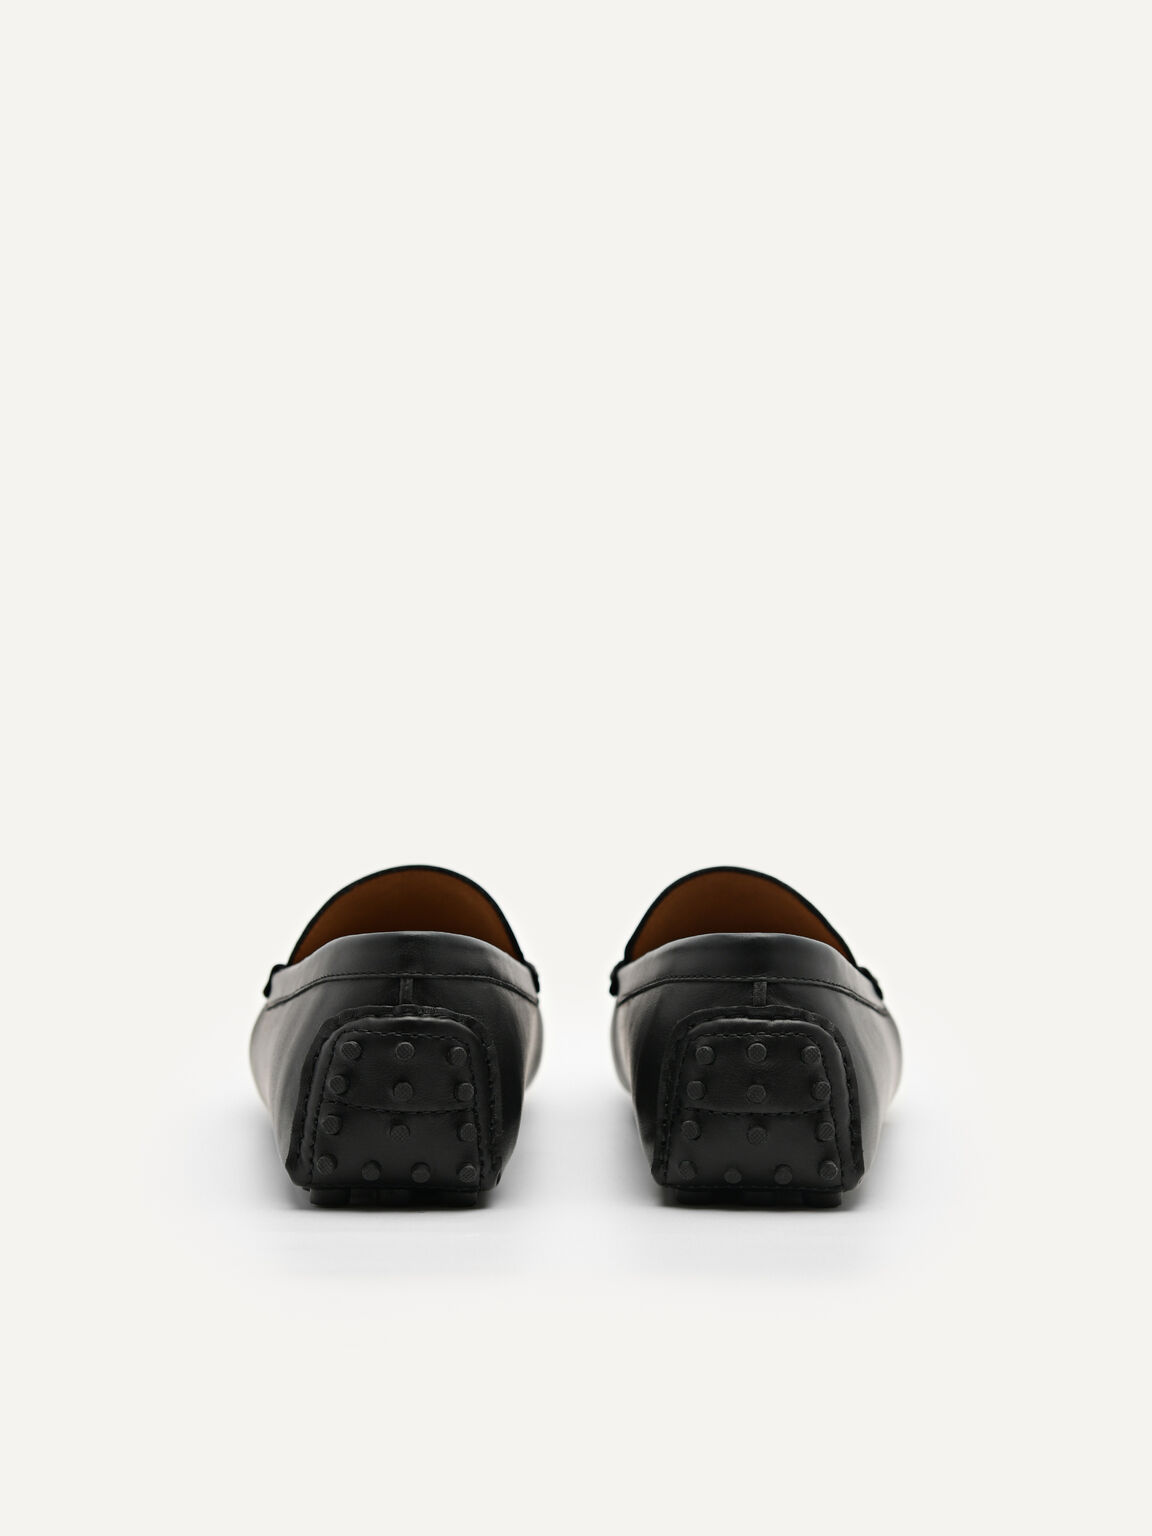 Leather Buckle Moccasins, Black